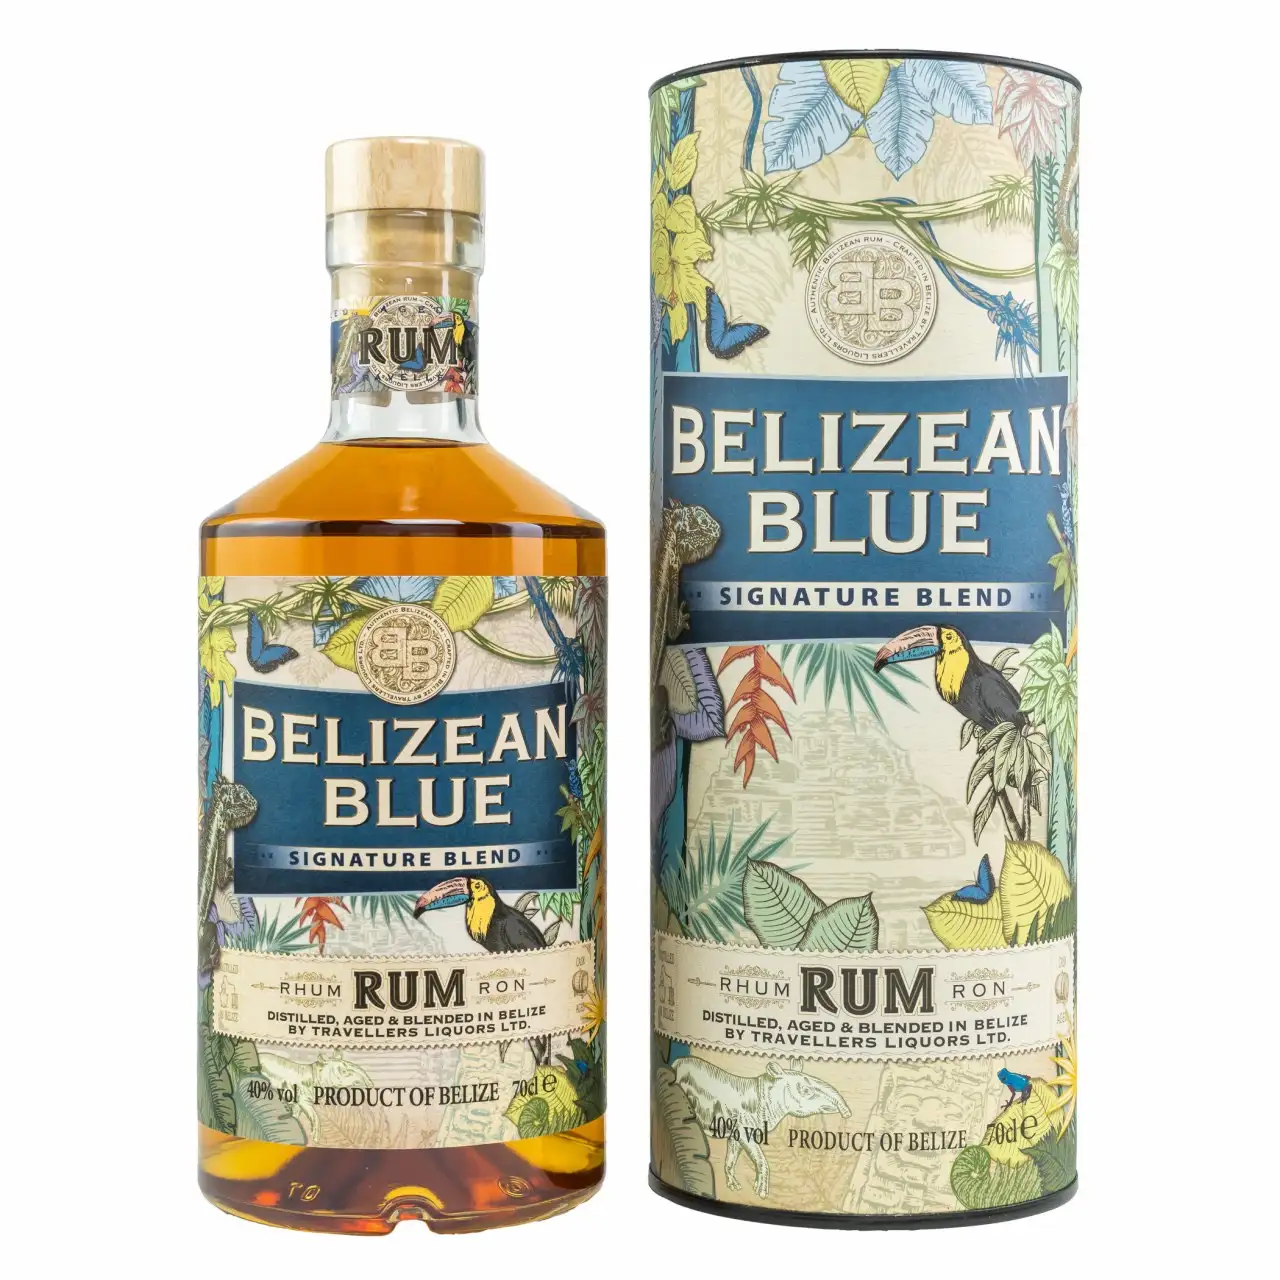 Image of the front of the bottle of the rum Belizean Blue Signature Blend